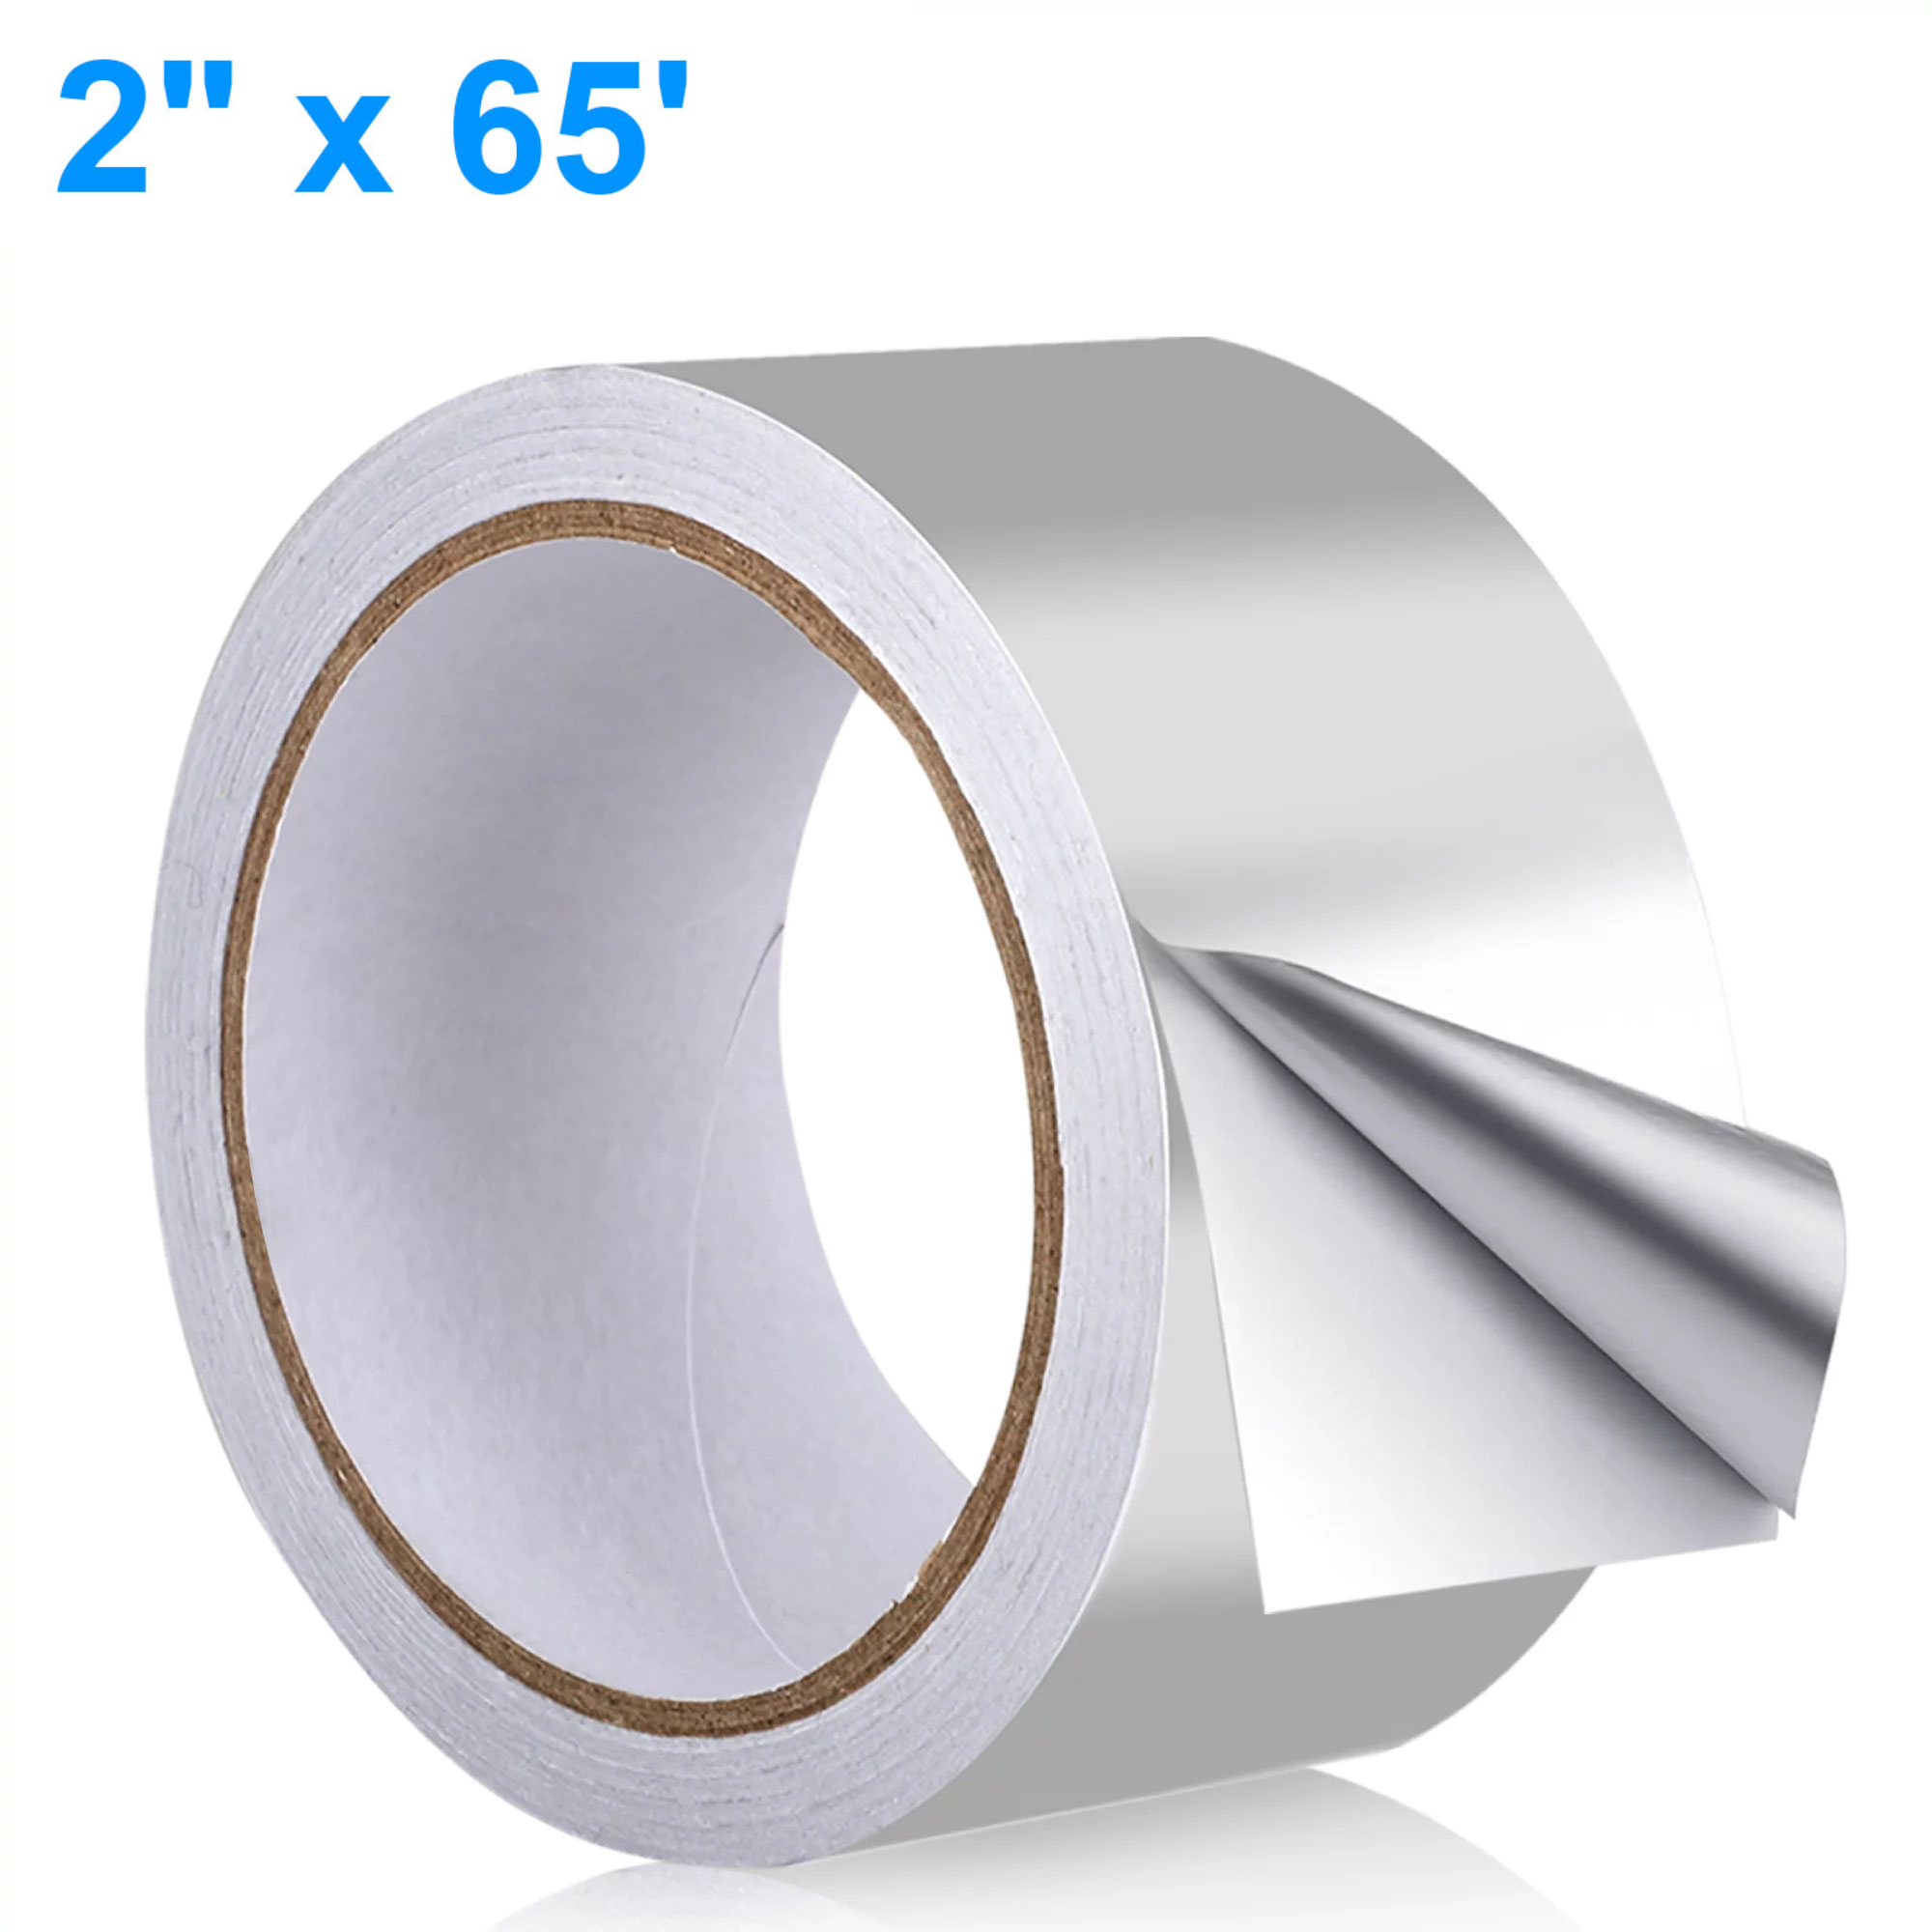 TSV 65' x 2" Aluminum Foil Tape, Self Adhesive Silver Metal Tape, High-Temperature HVAC Tape for Ductwork, Dryer Vent, AC Unit, Furnace, Water Heater - image 1 of 4